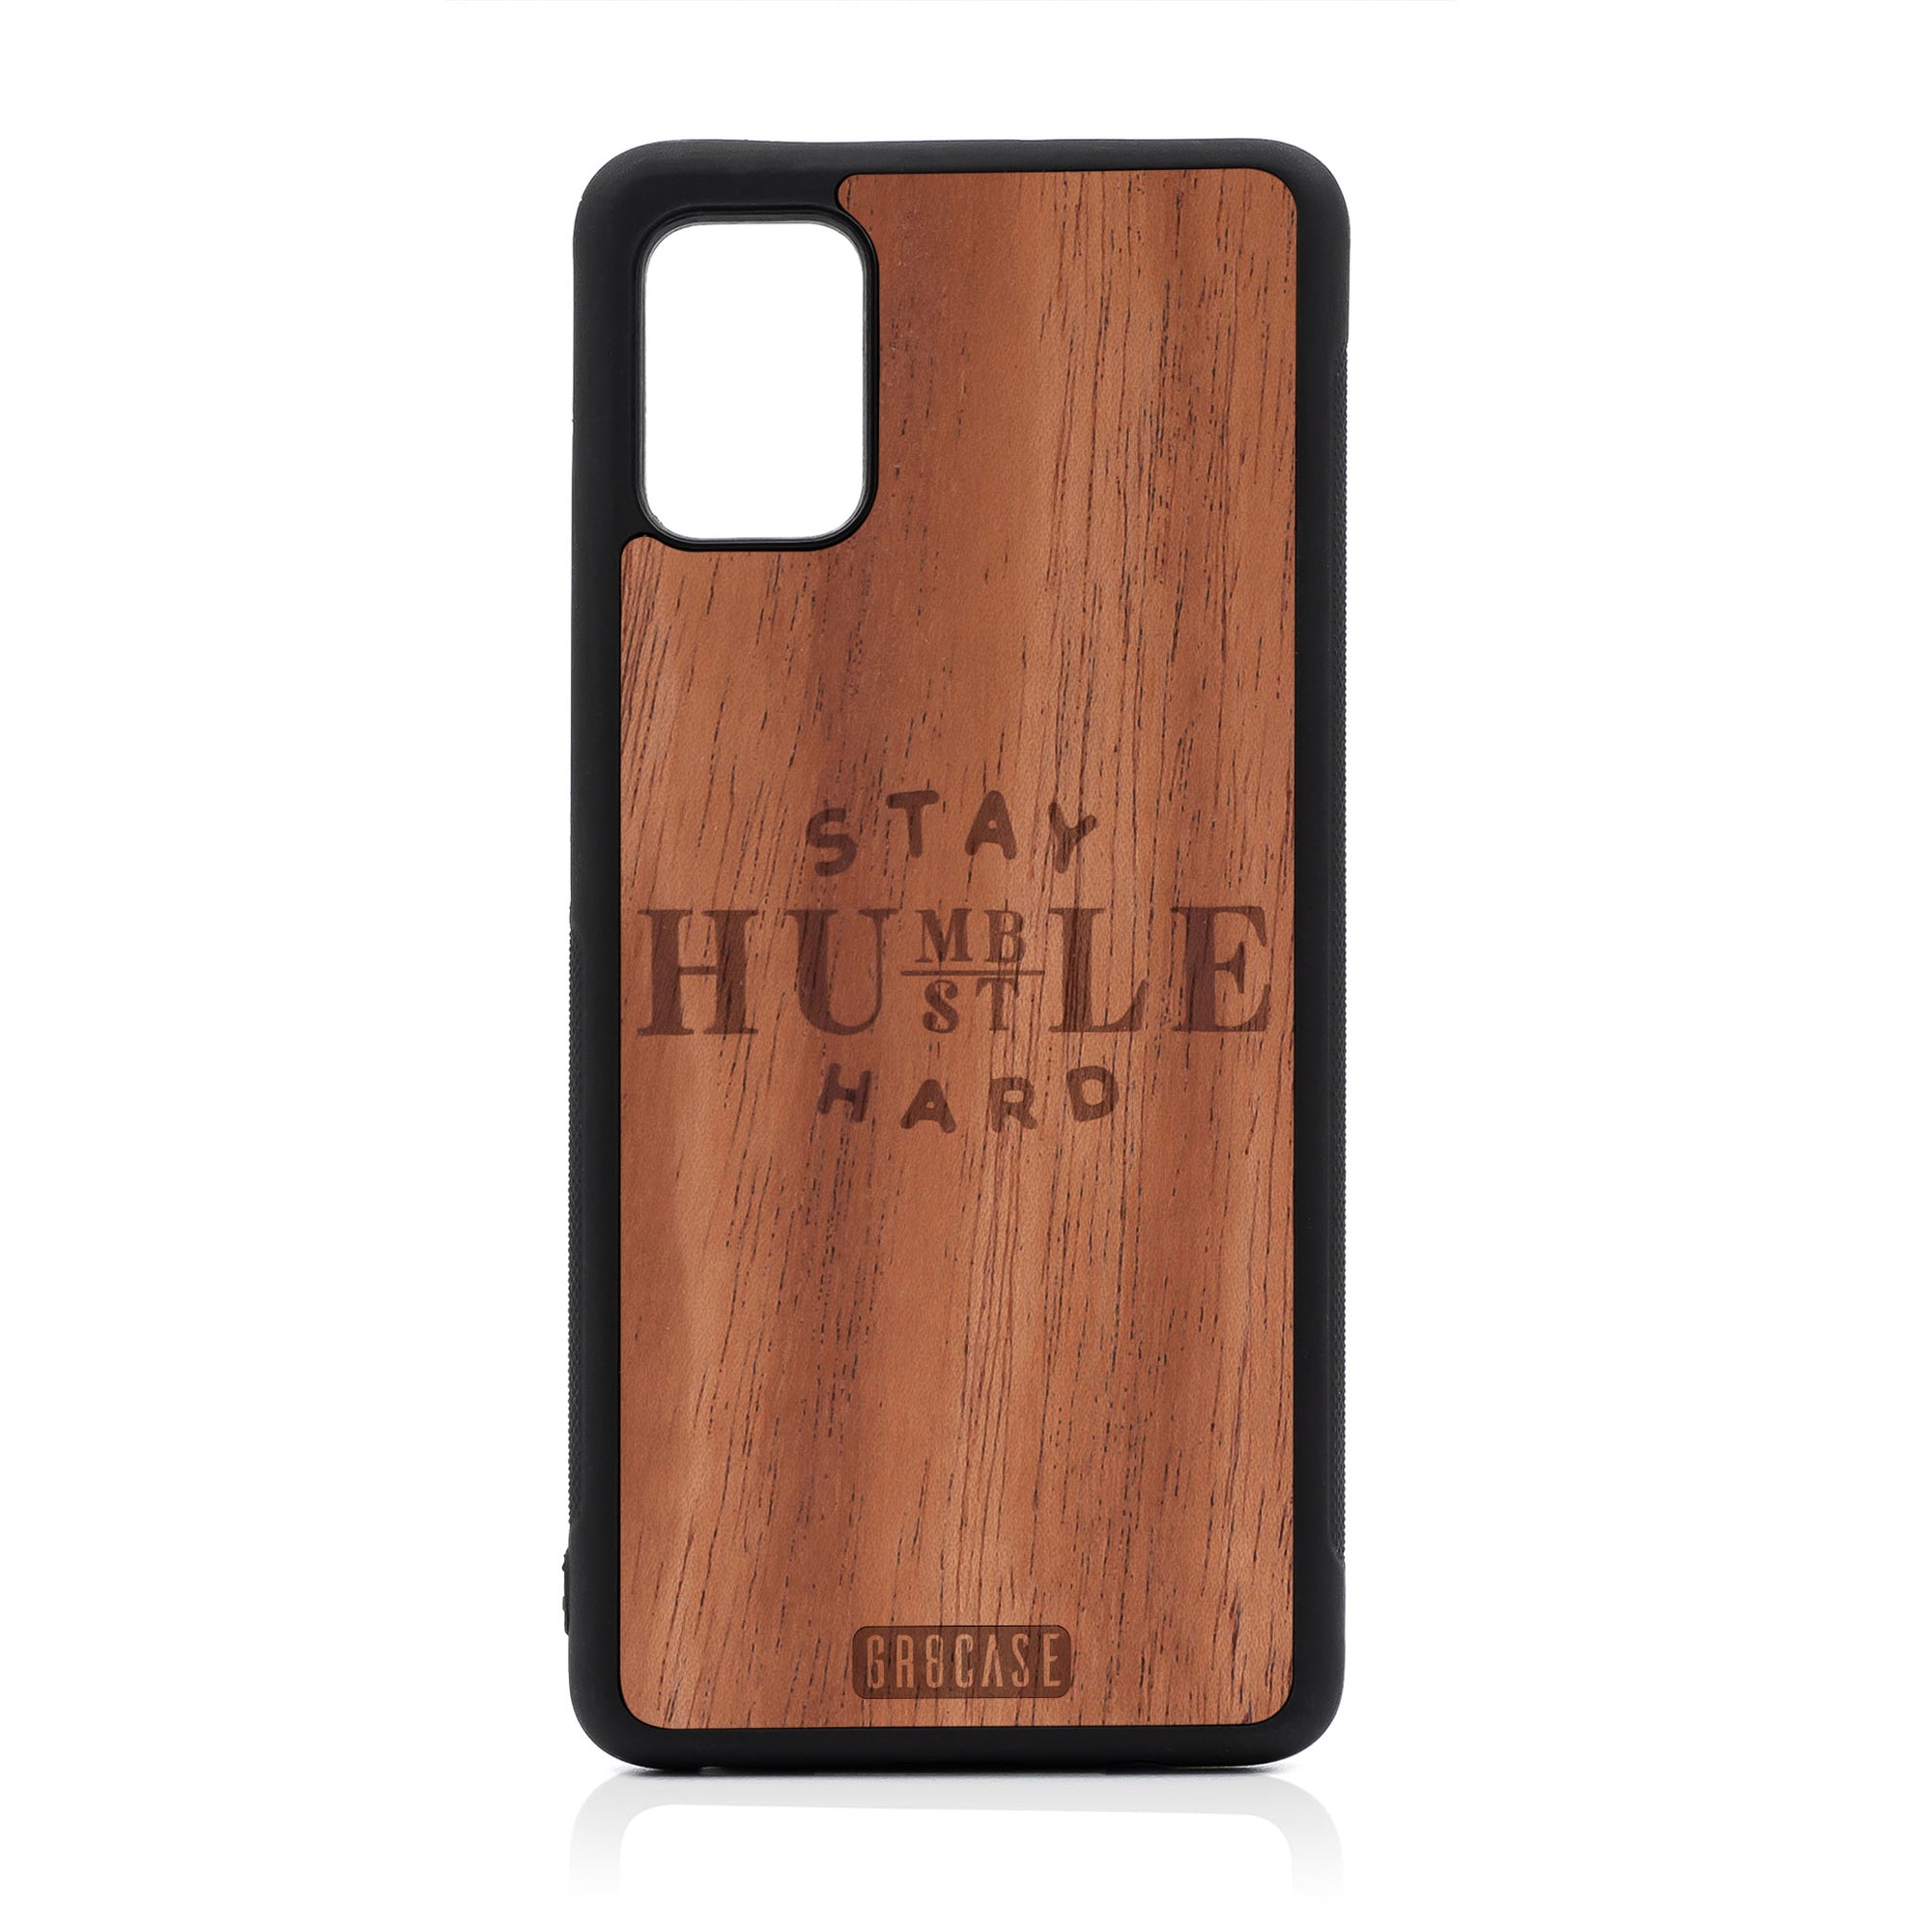 Stay Humble Hustle Hard Design Wood Case For Samsung Galaxy A51 5G